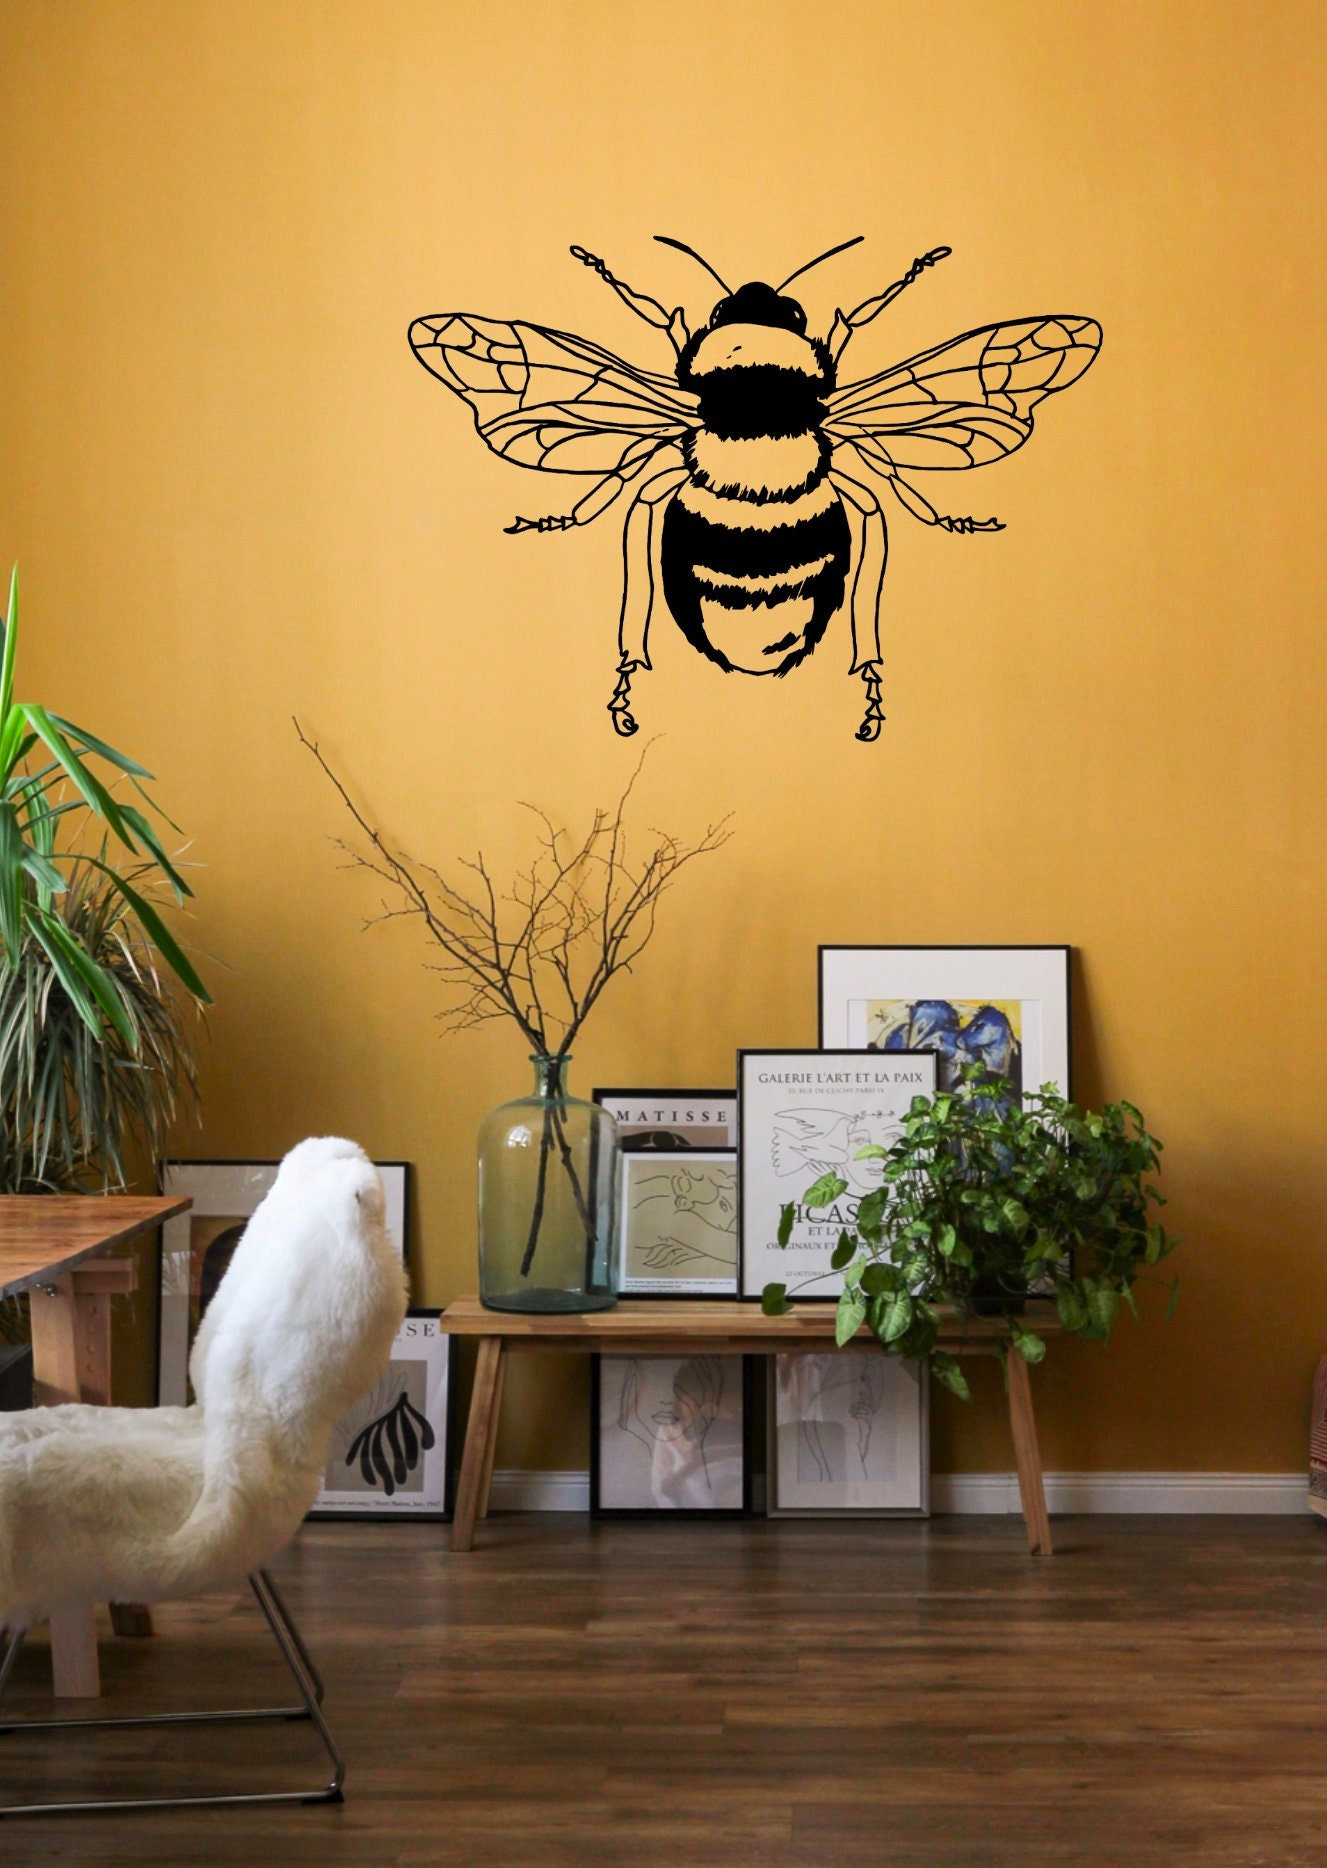 Farmhouse Gold Bumble Bee Sign, Bee Wall Decor, Farmhouse Honey Bee Honey  Comb Decor, Bumble Bee Decor Decoration 